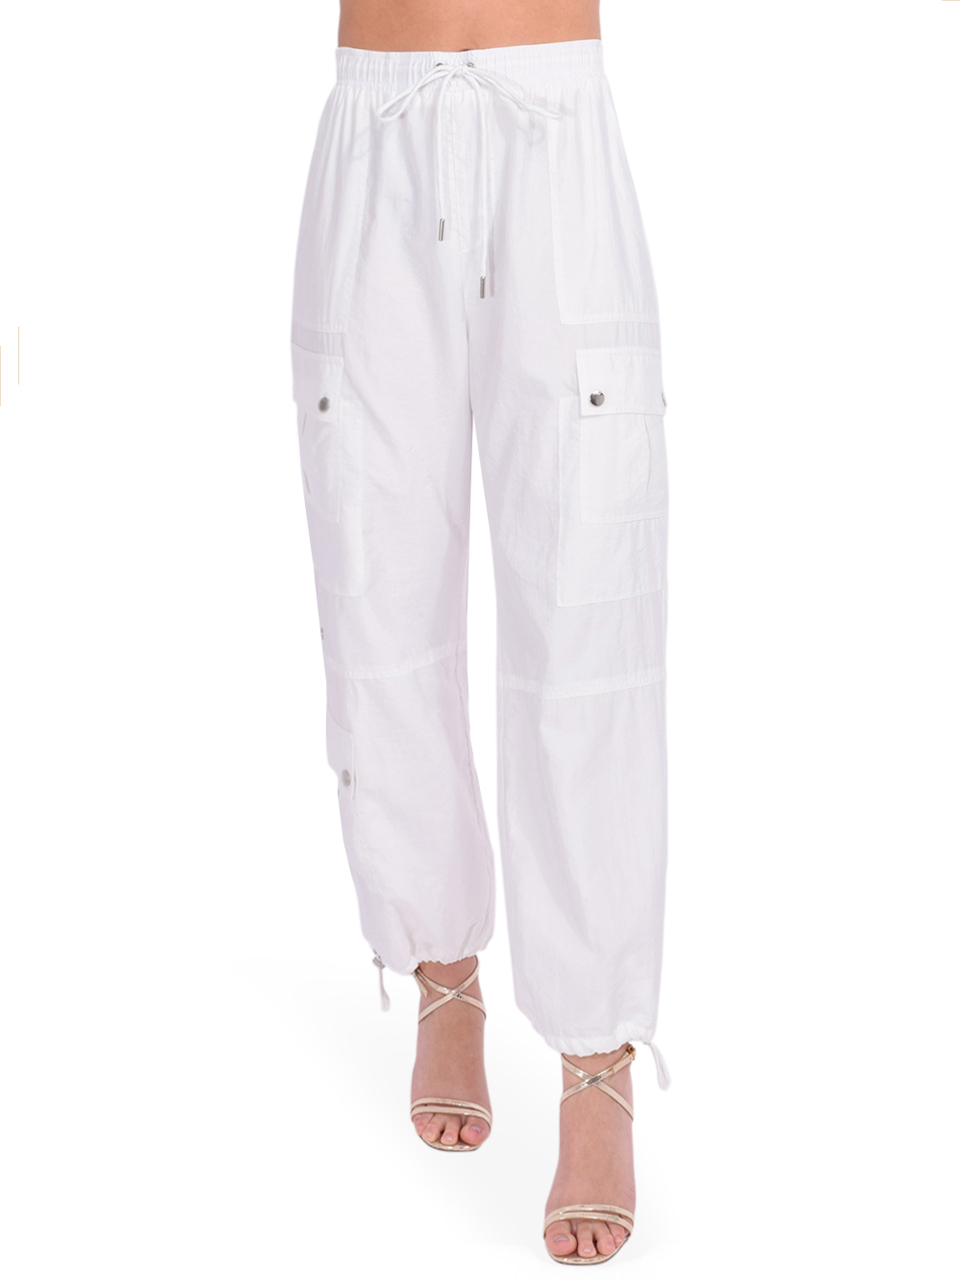 Cinq a Sept Nitsan Parachute Pant in White Front View 